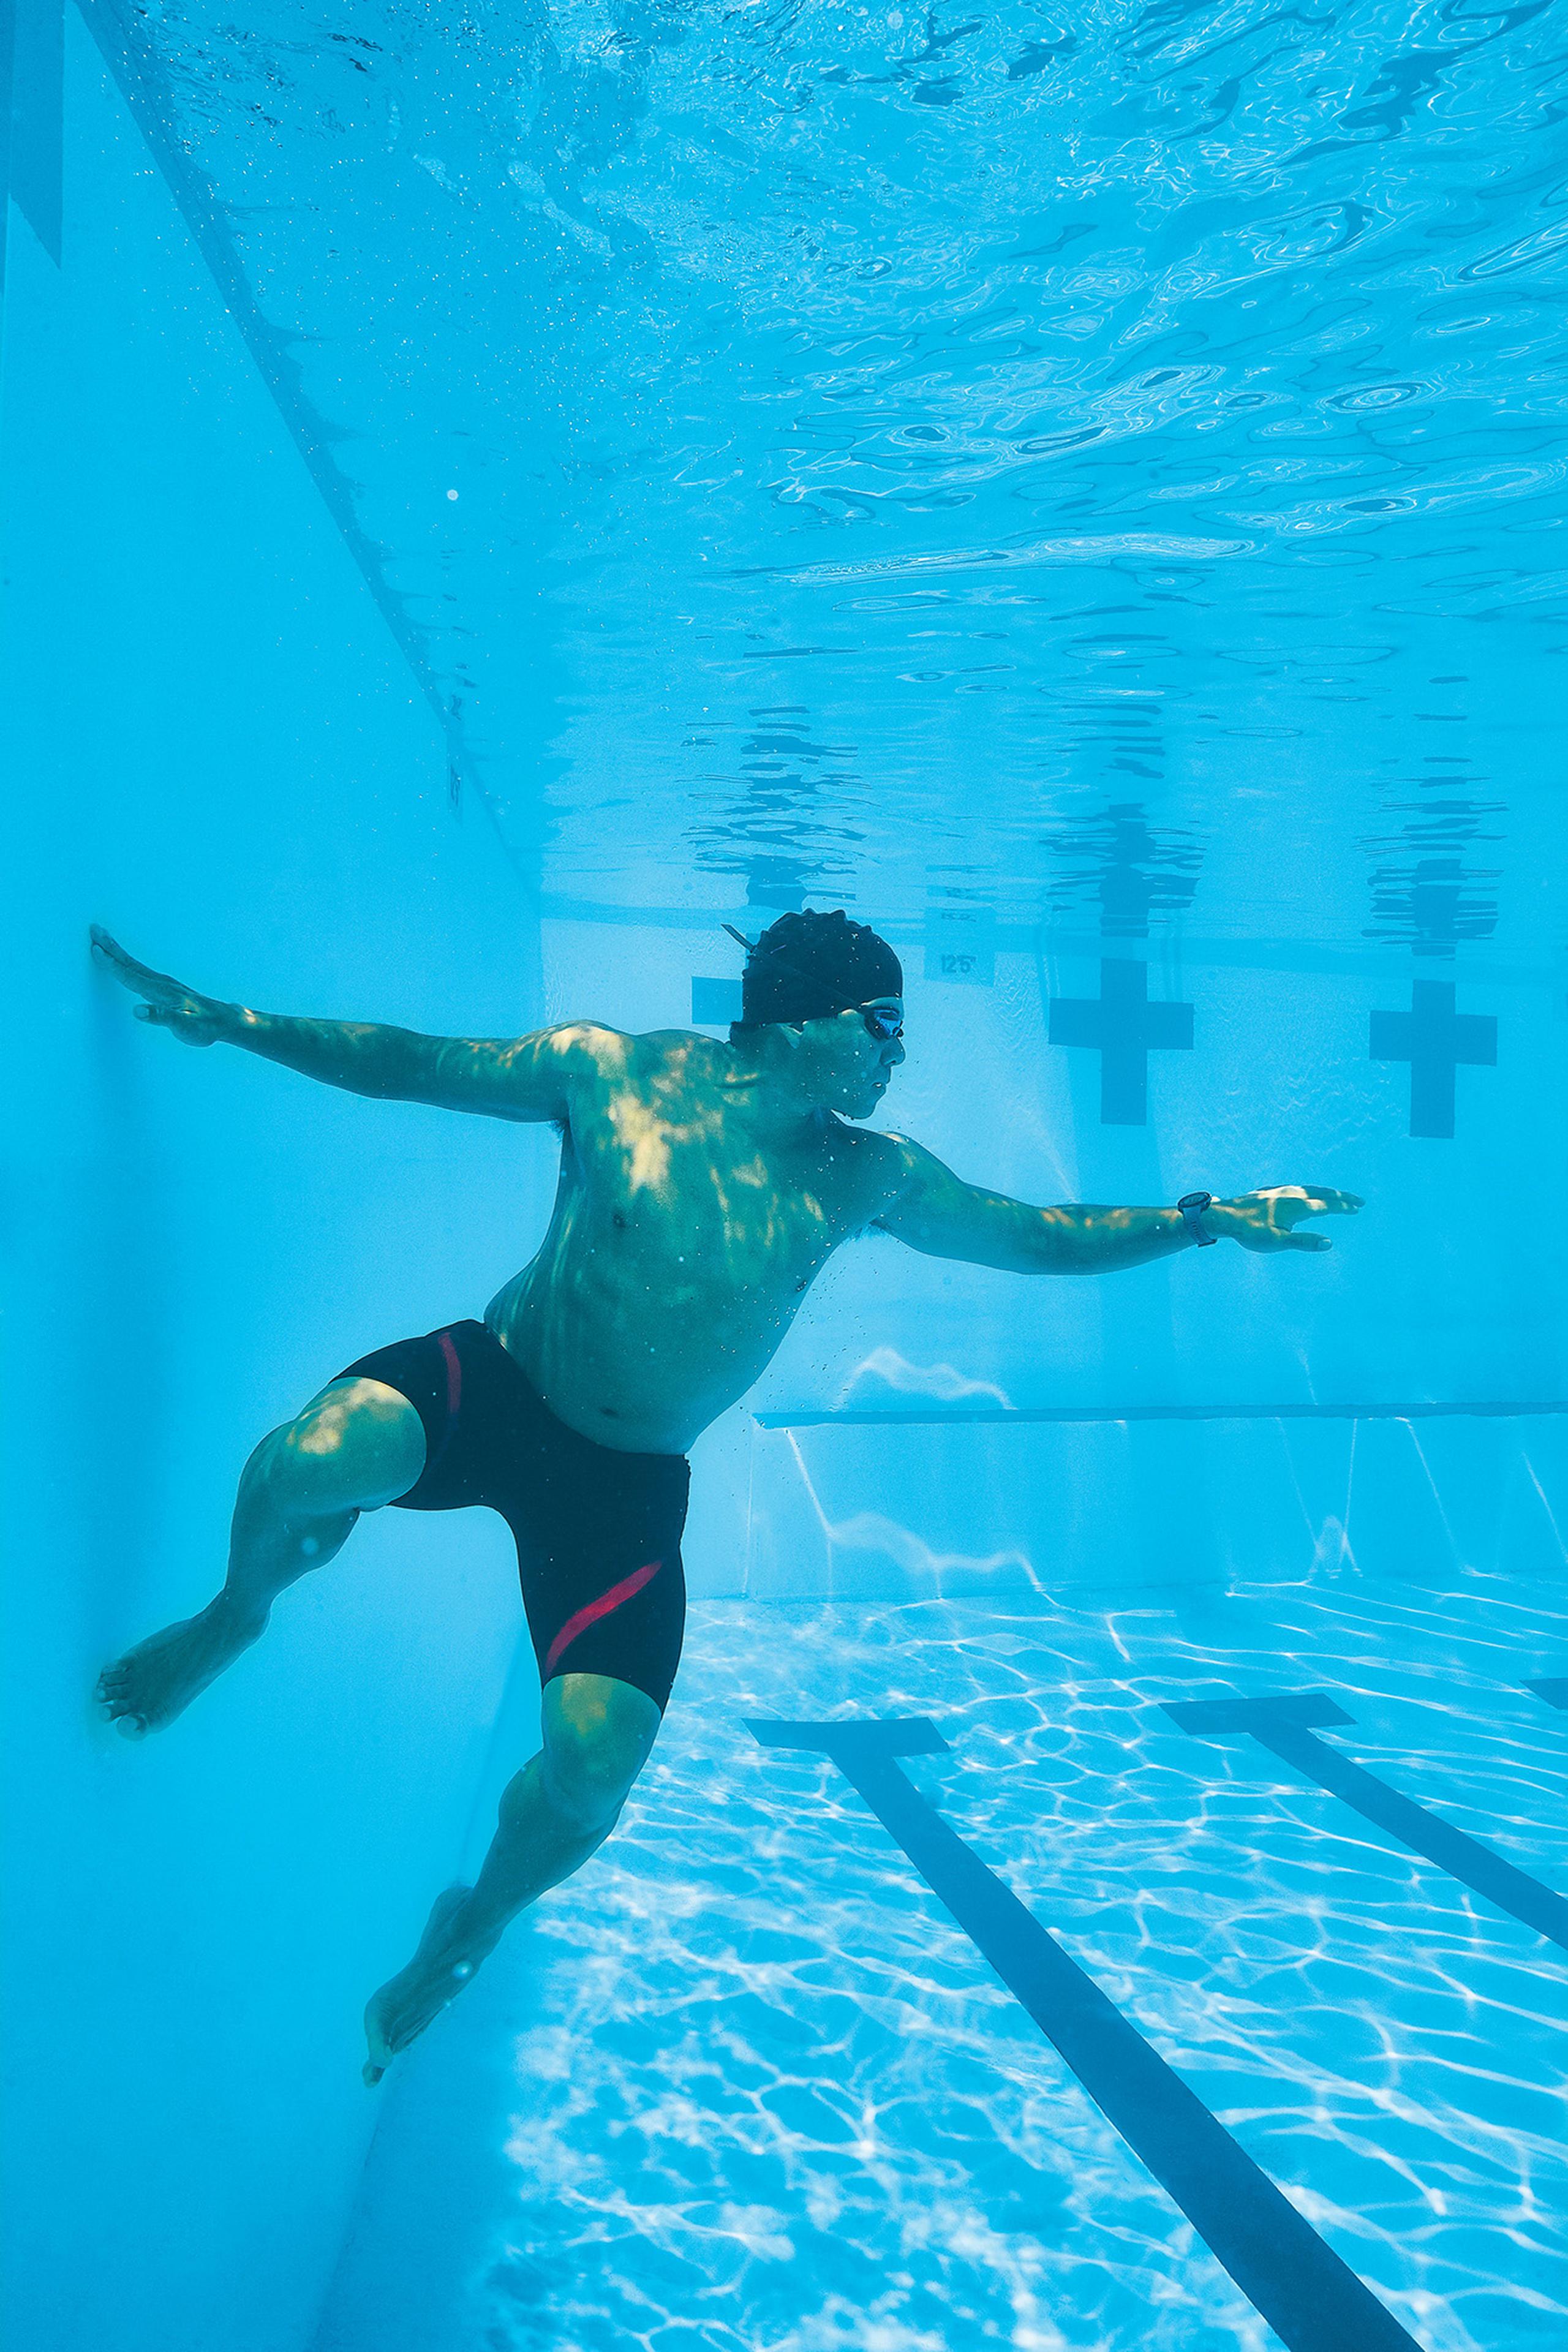 Garmin Swim 2 lets you monitor your heart rate underwater